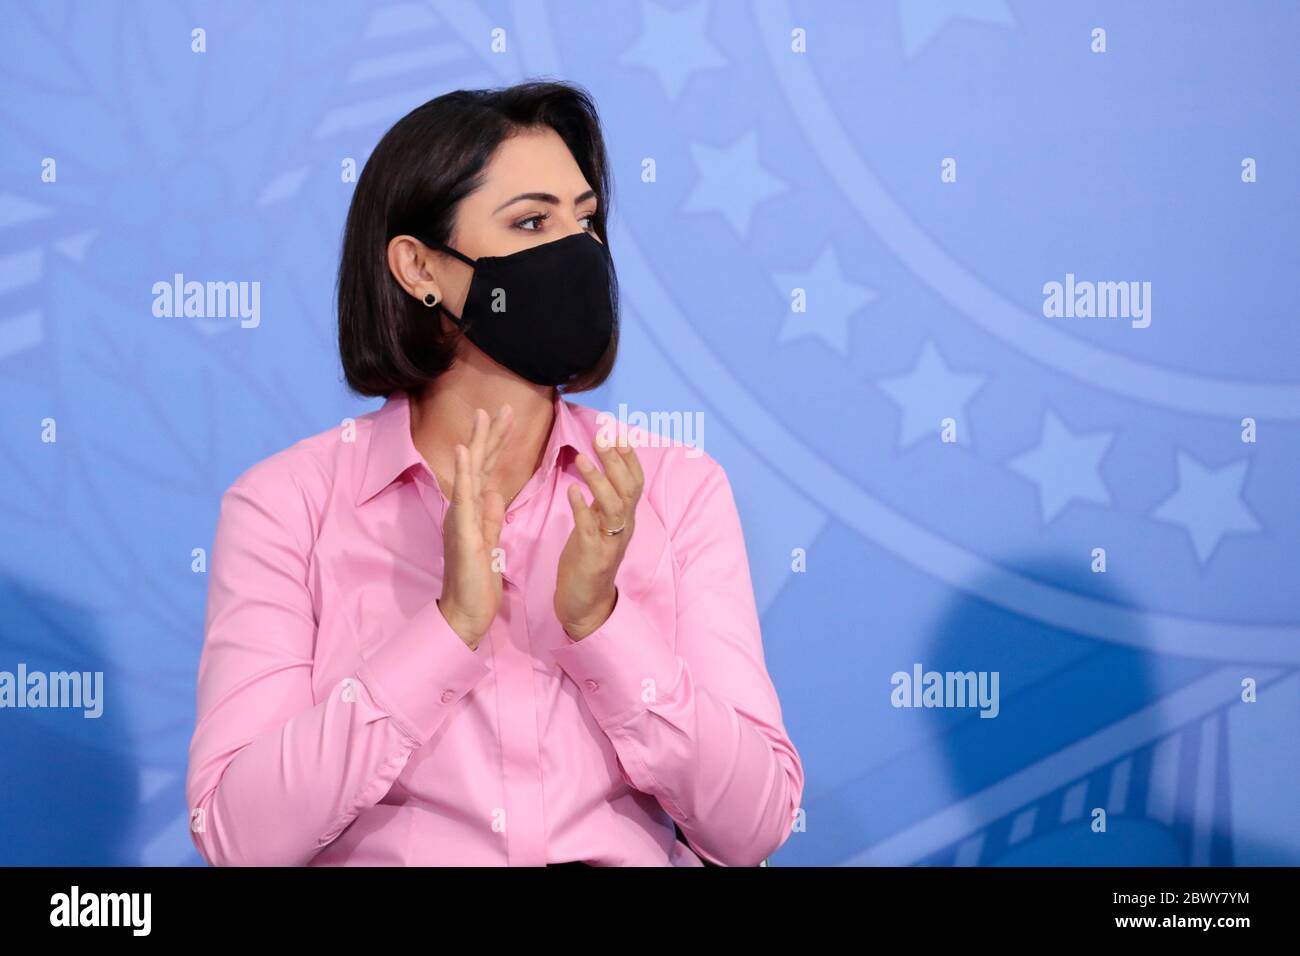 Brazilian First Lady Michelle Bolsonaro, wears a mask amid the COVID-19 pandemic, during an event promoting a government campaign against domestic violence at Planalto presidential palace May 15, 2020 in Brasilia, Brazil. Stock Photo